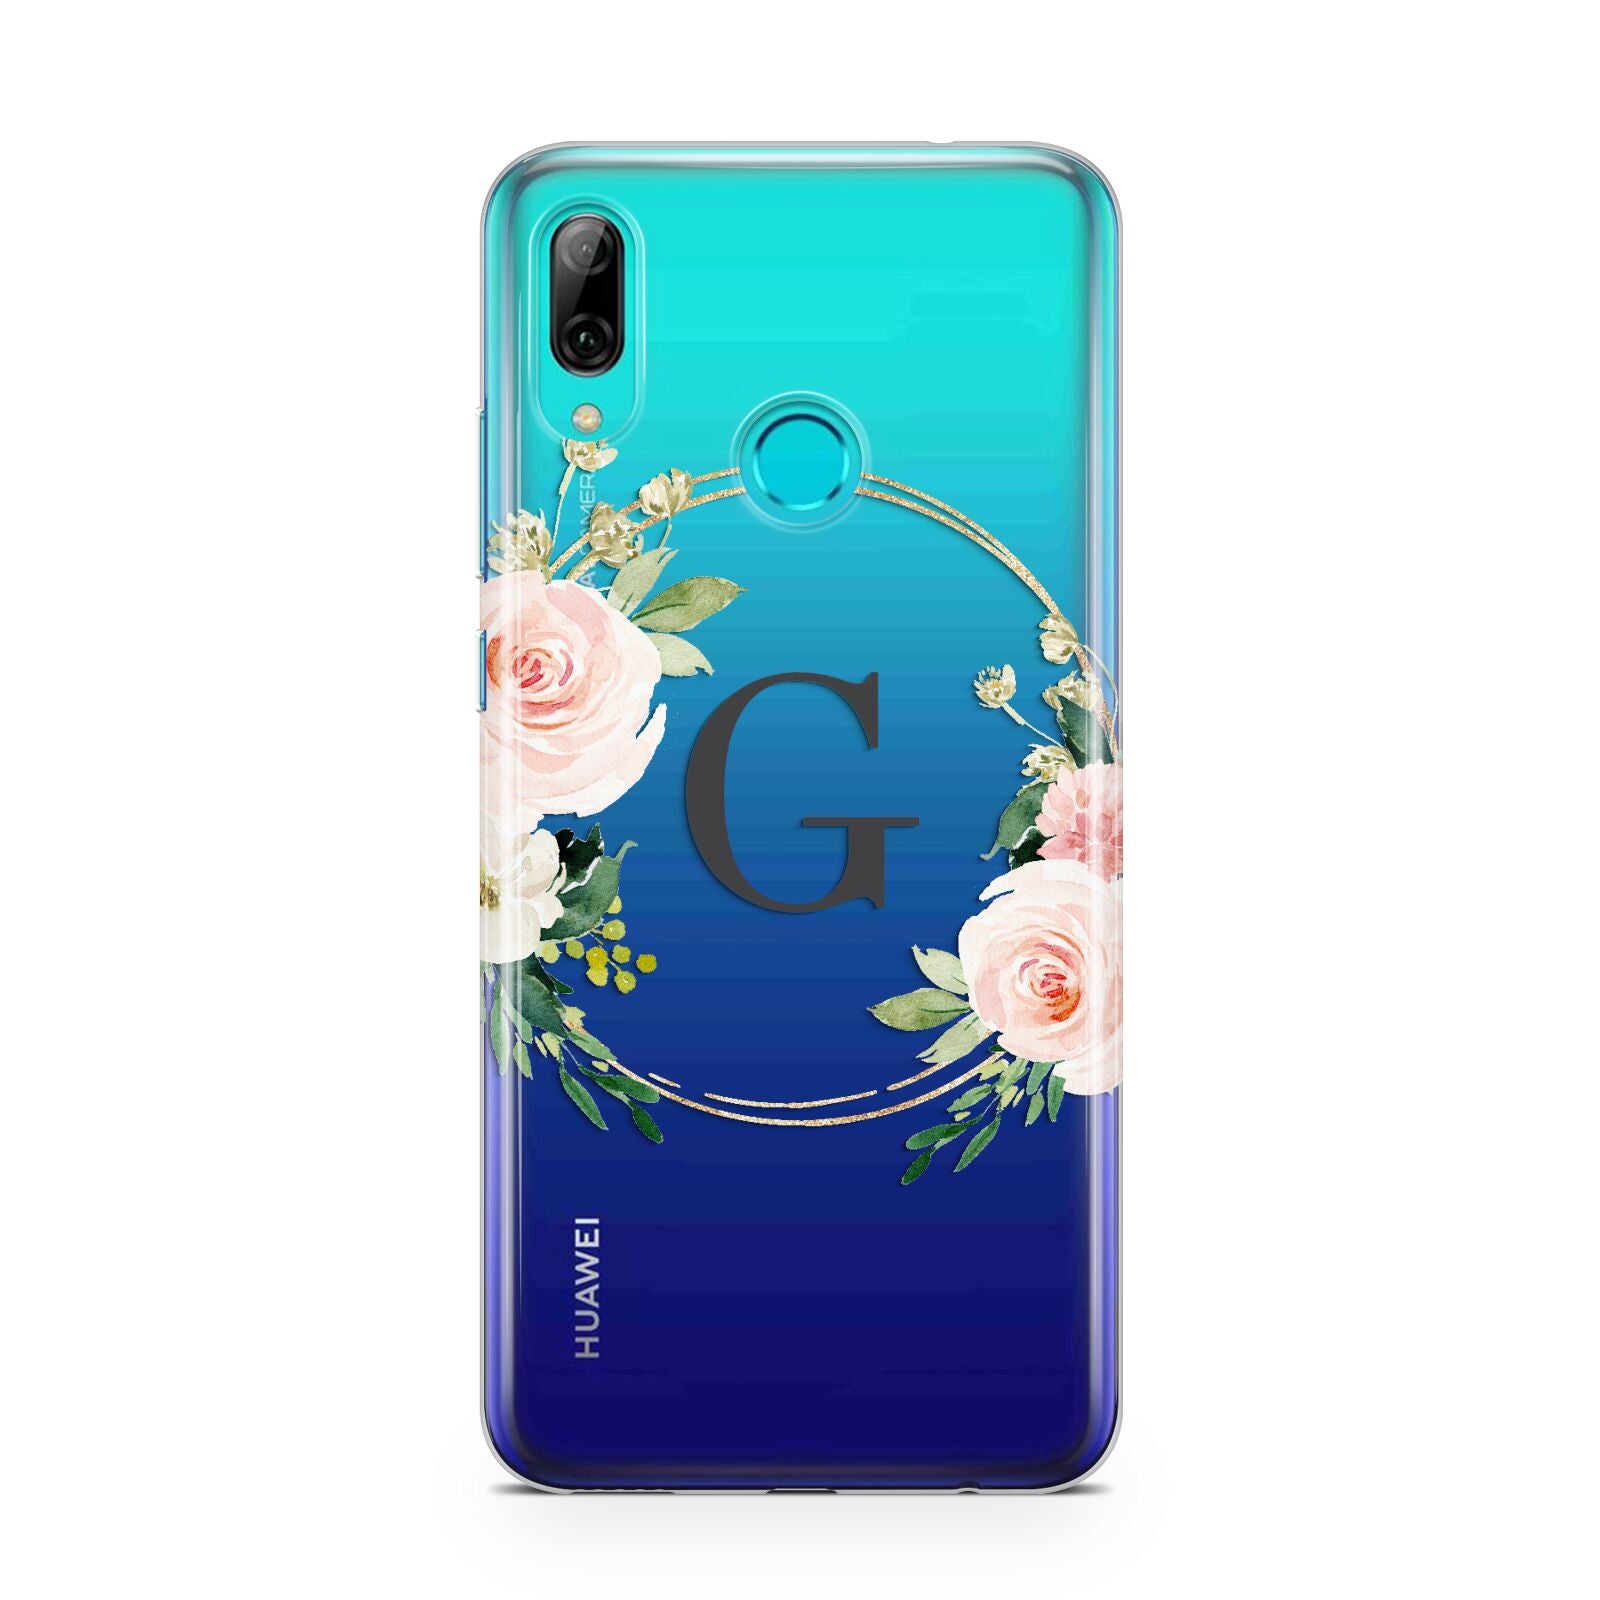 Personalised Blush Floral Wreath Huawei P Smart 2019 Case